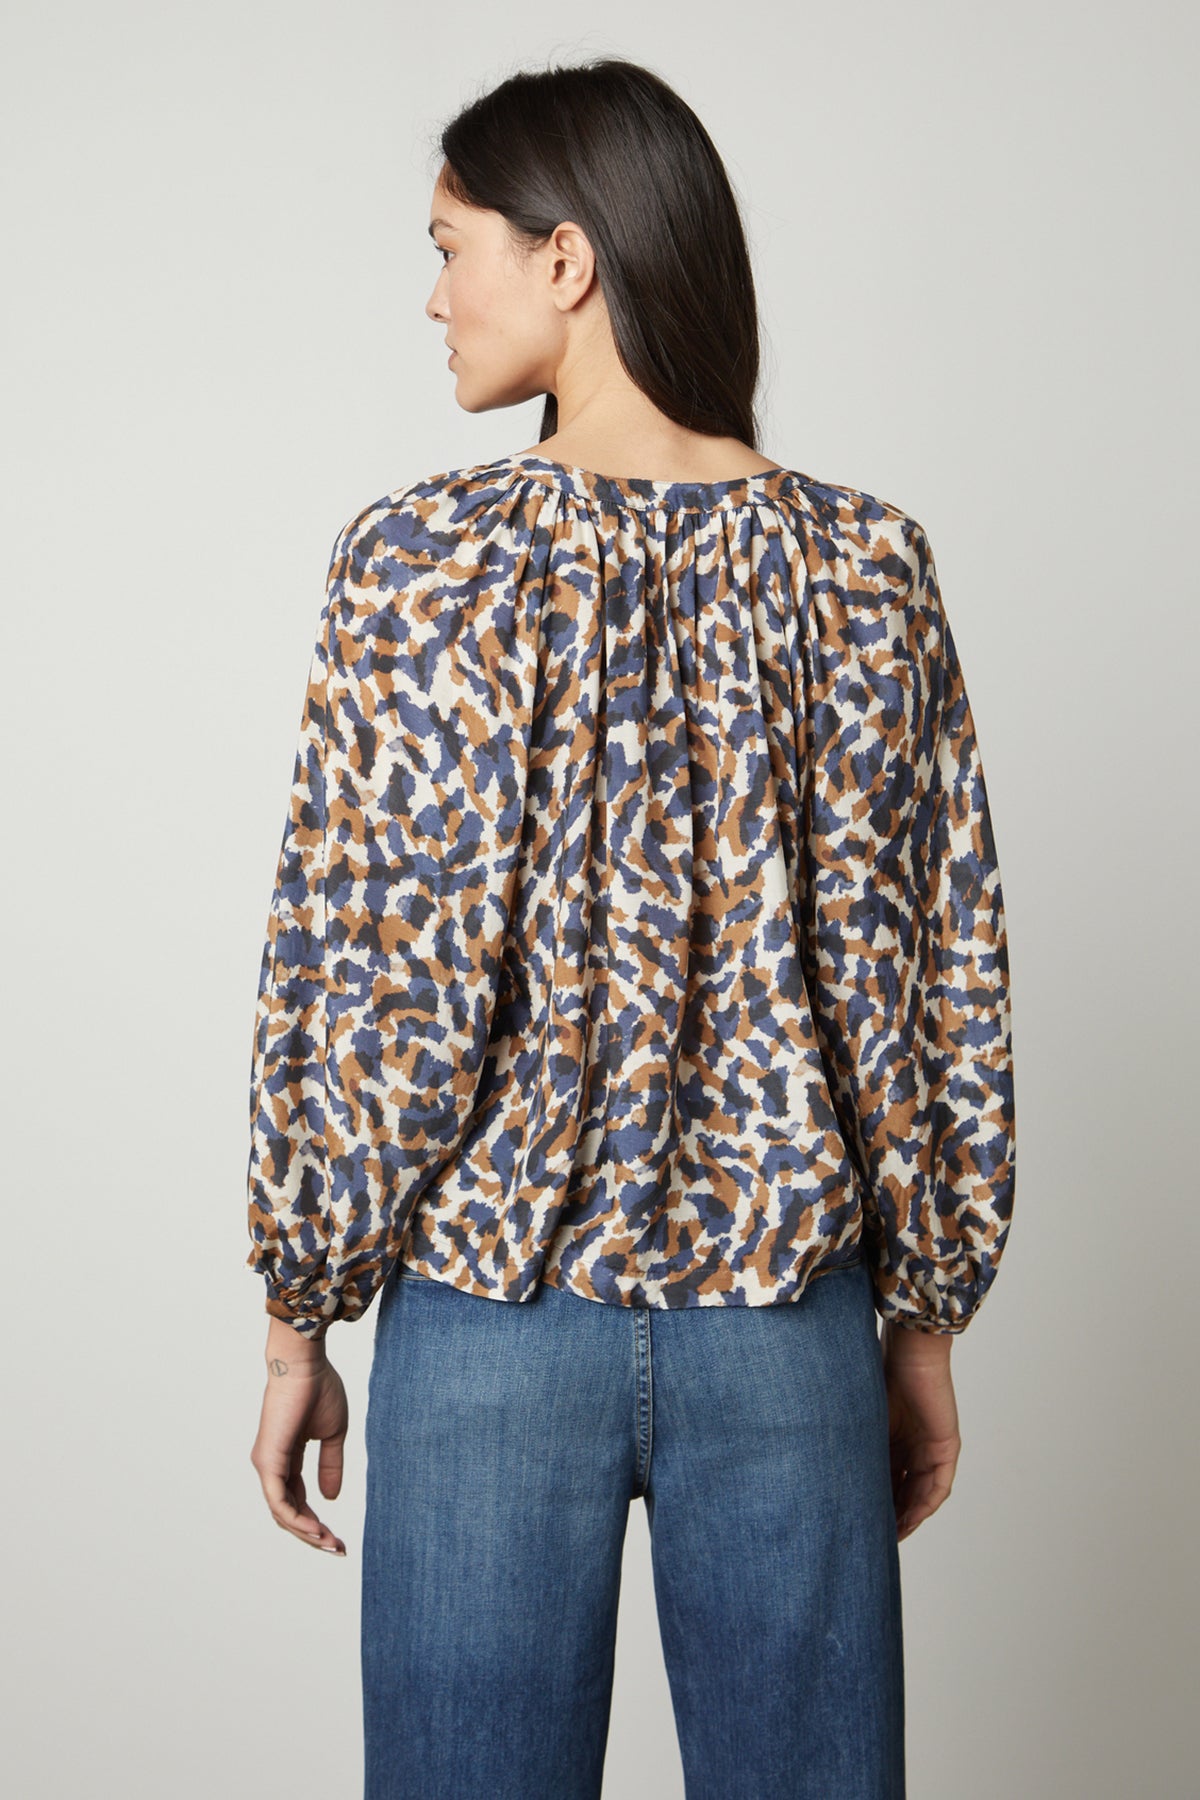   The view of a woman wearing the Velvet by Graham & Spencer MELINDA PRINTED BUTTON-UP TOP blouse. 